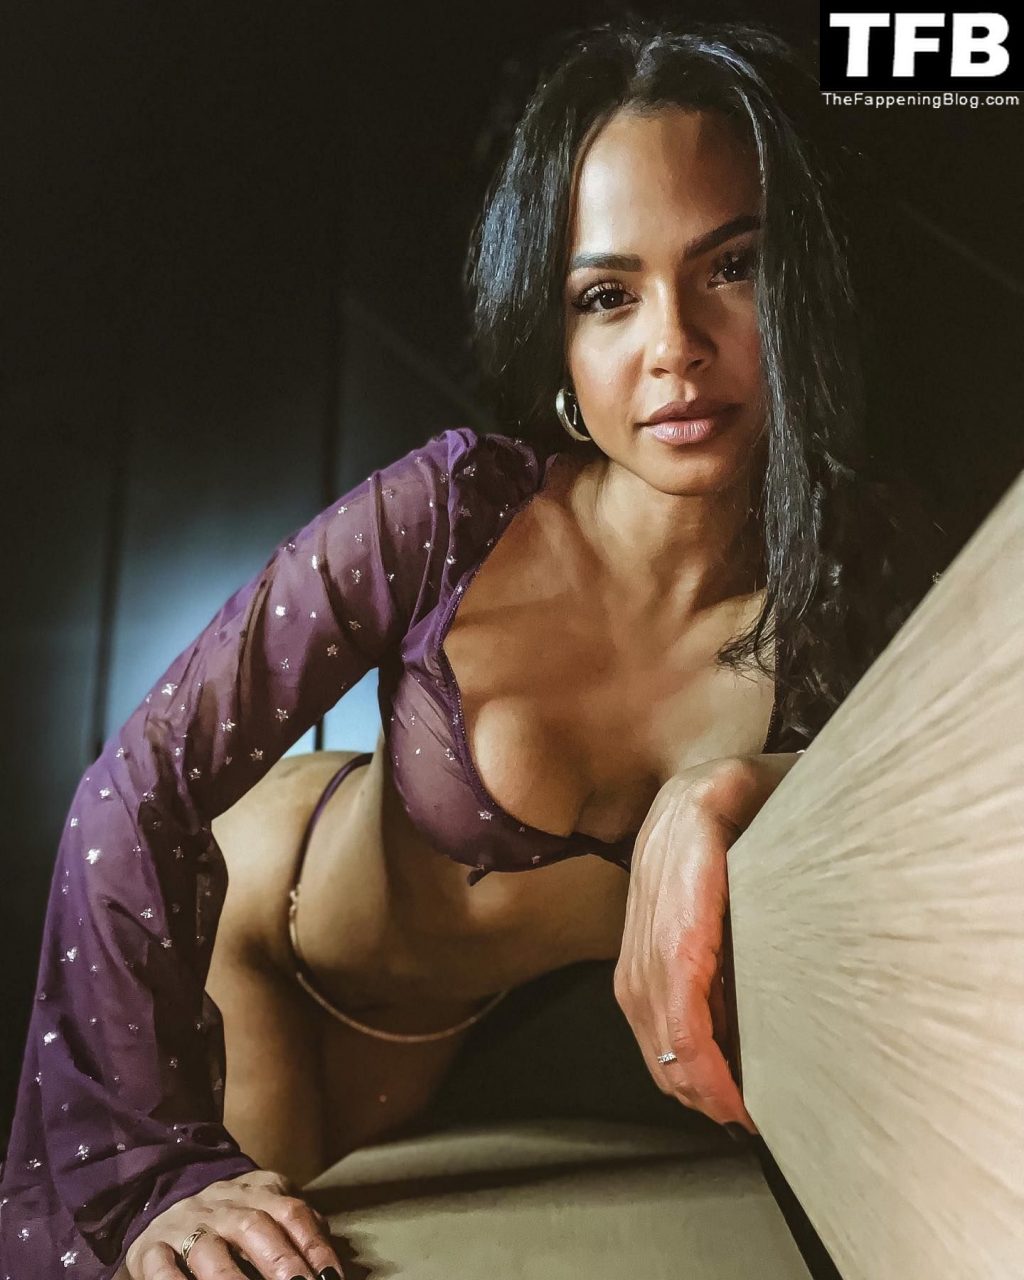 Christina Milian Nude The Fappening Blog 2 1024x1280 - Christina Milian Flashes Her Nude Tits (5 Photos)